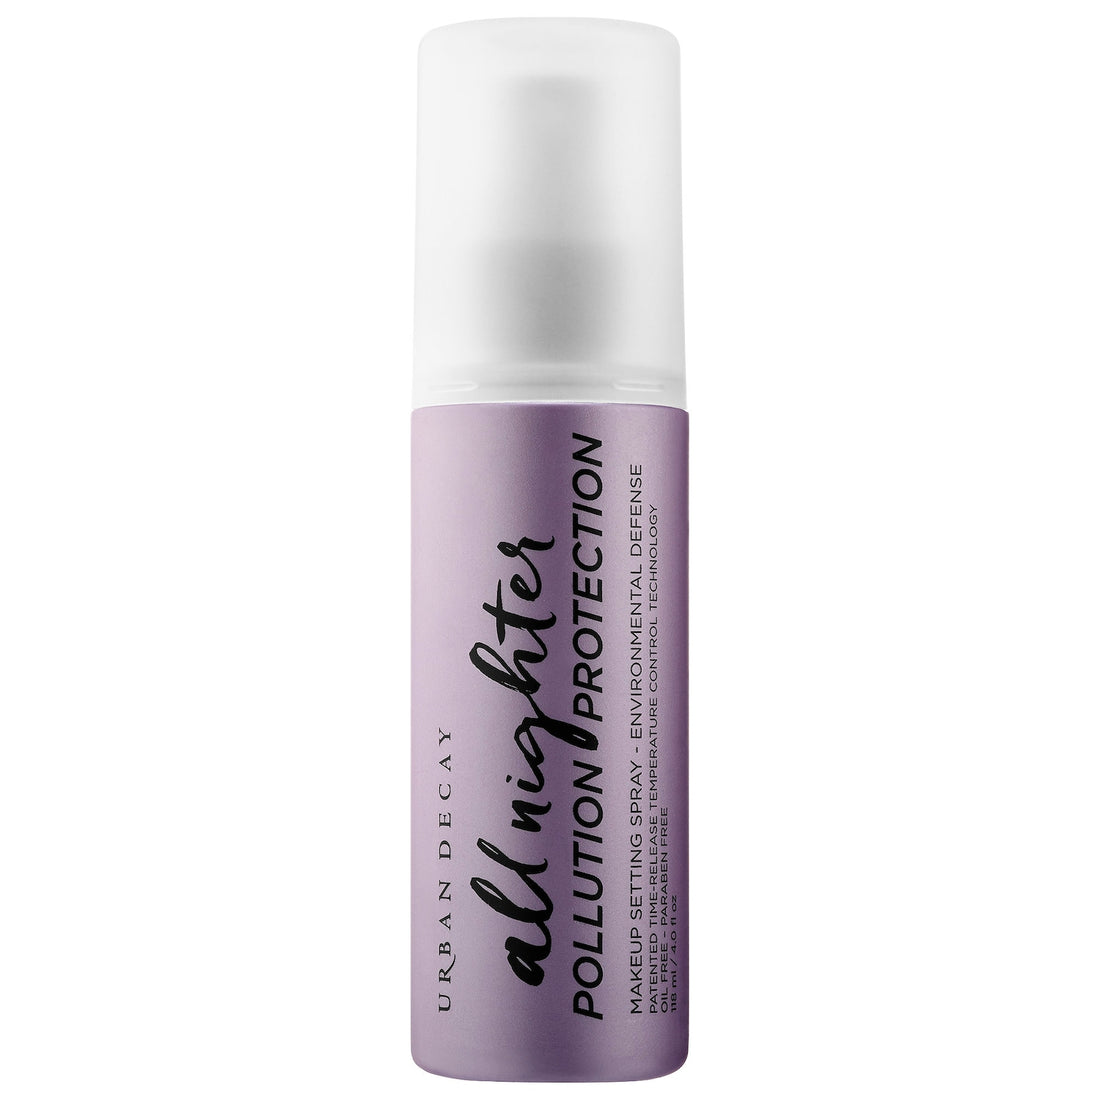 All Nighter Pollution Protection Makeup Setting Spray